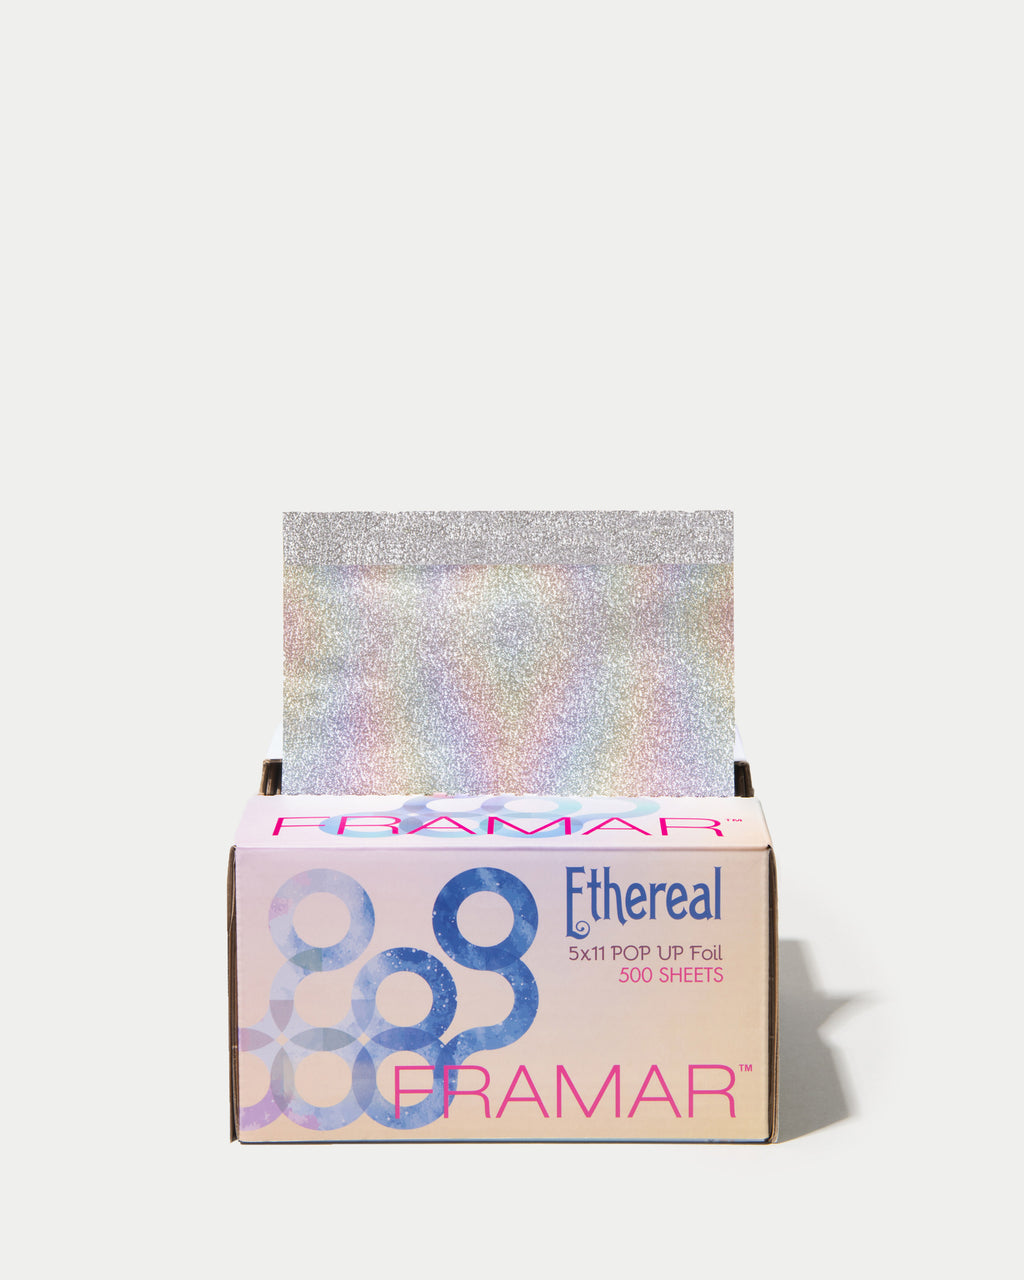 Framar - The people have spoken! Ethereal is your fav framar foil color😍  Because you guys are so awesome, we're giving a box away to 3 of you! Desy  Baker , Samantha